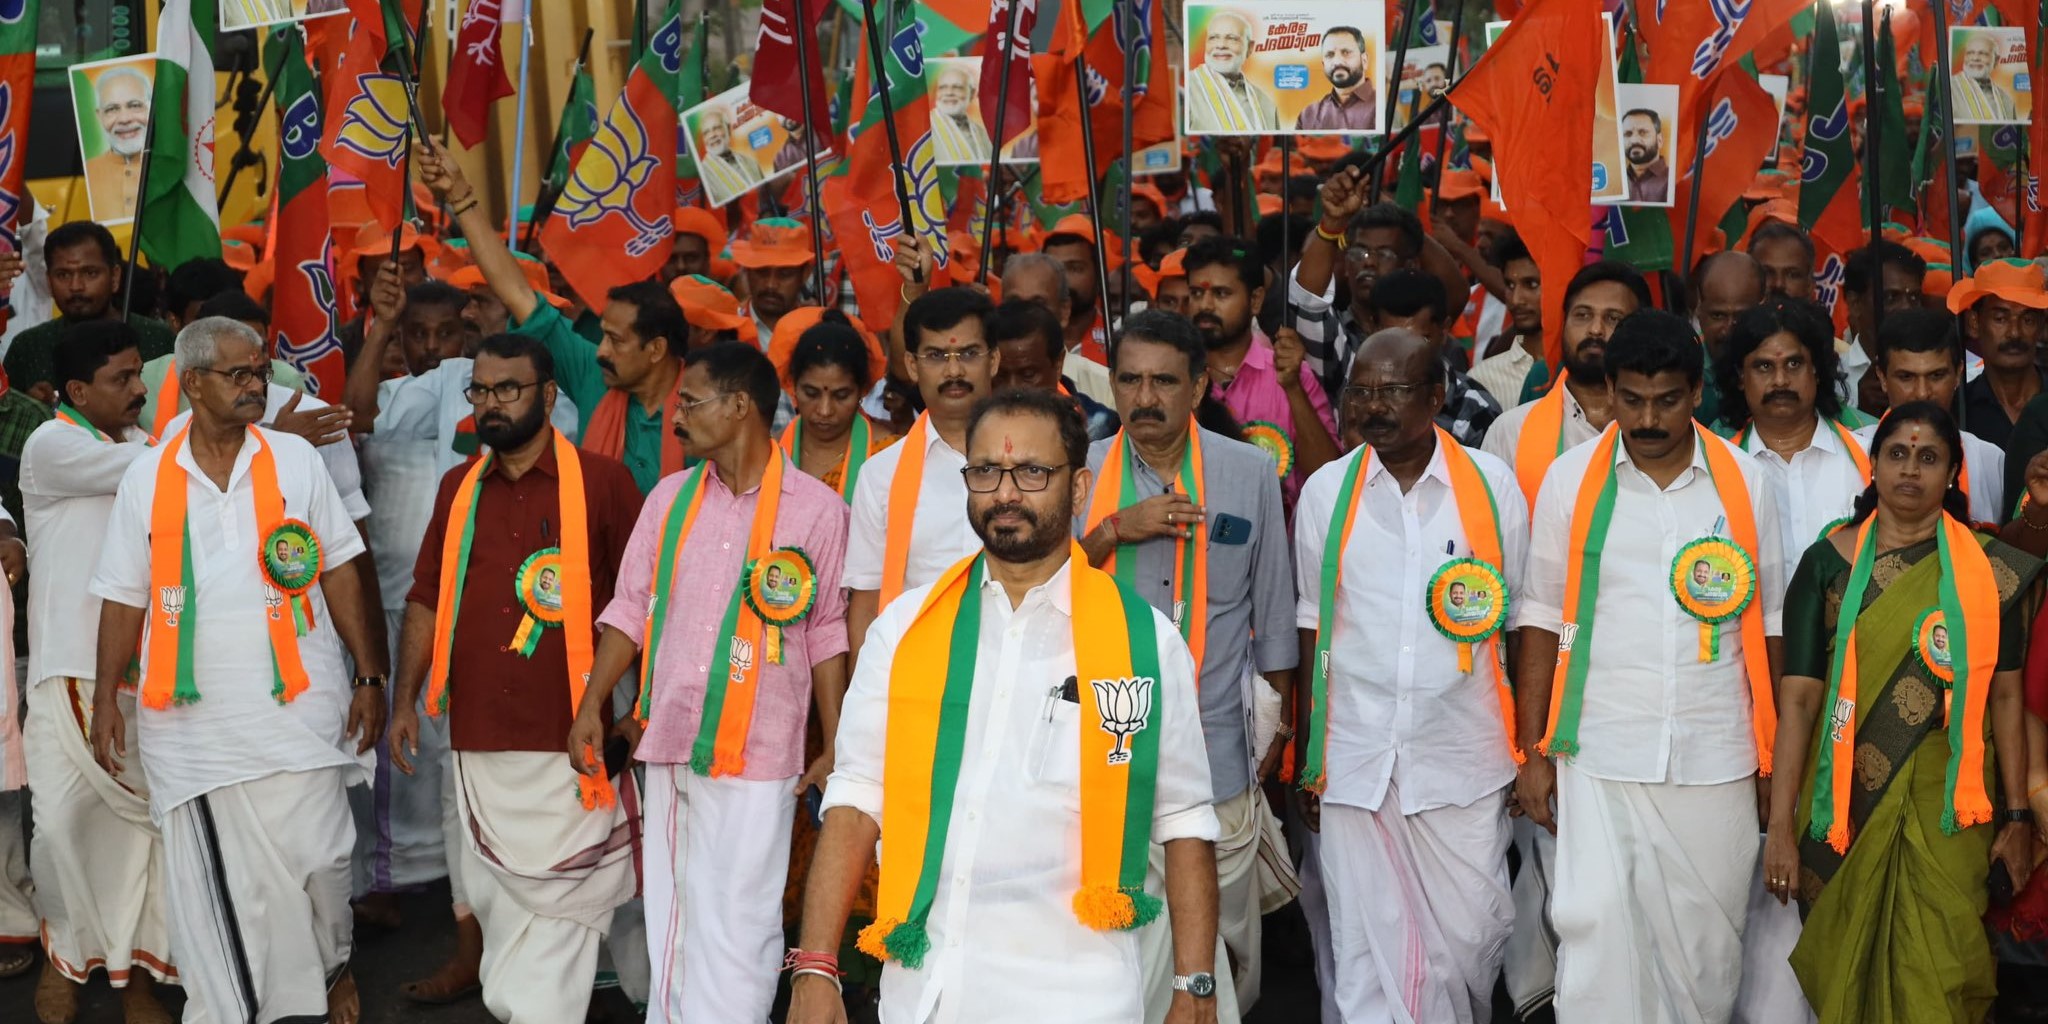 Kerala BJP shoots itself in the foot, plays song urging people to destroy the ‘corrupt’ Union government